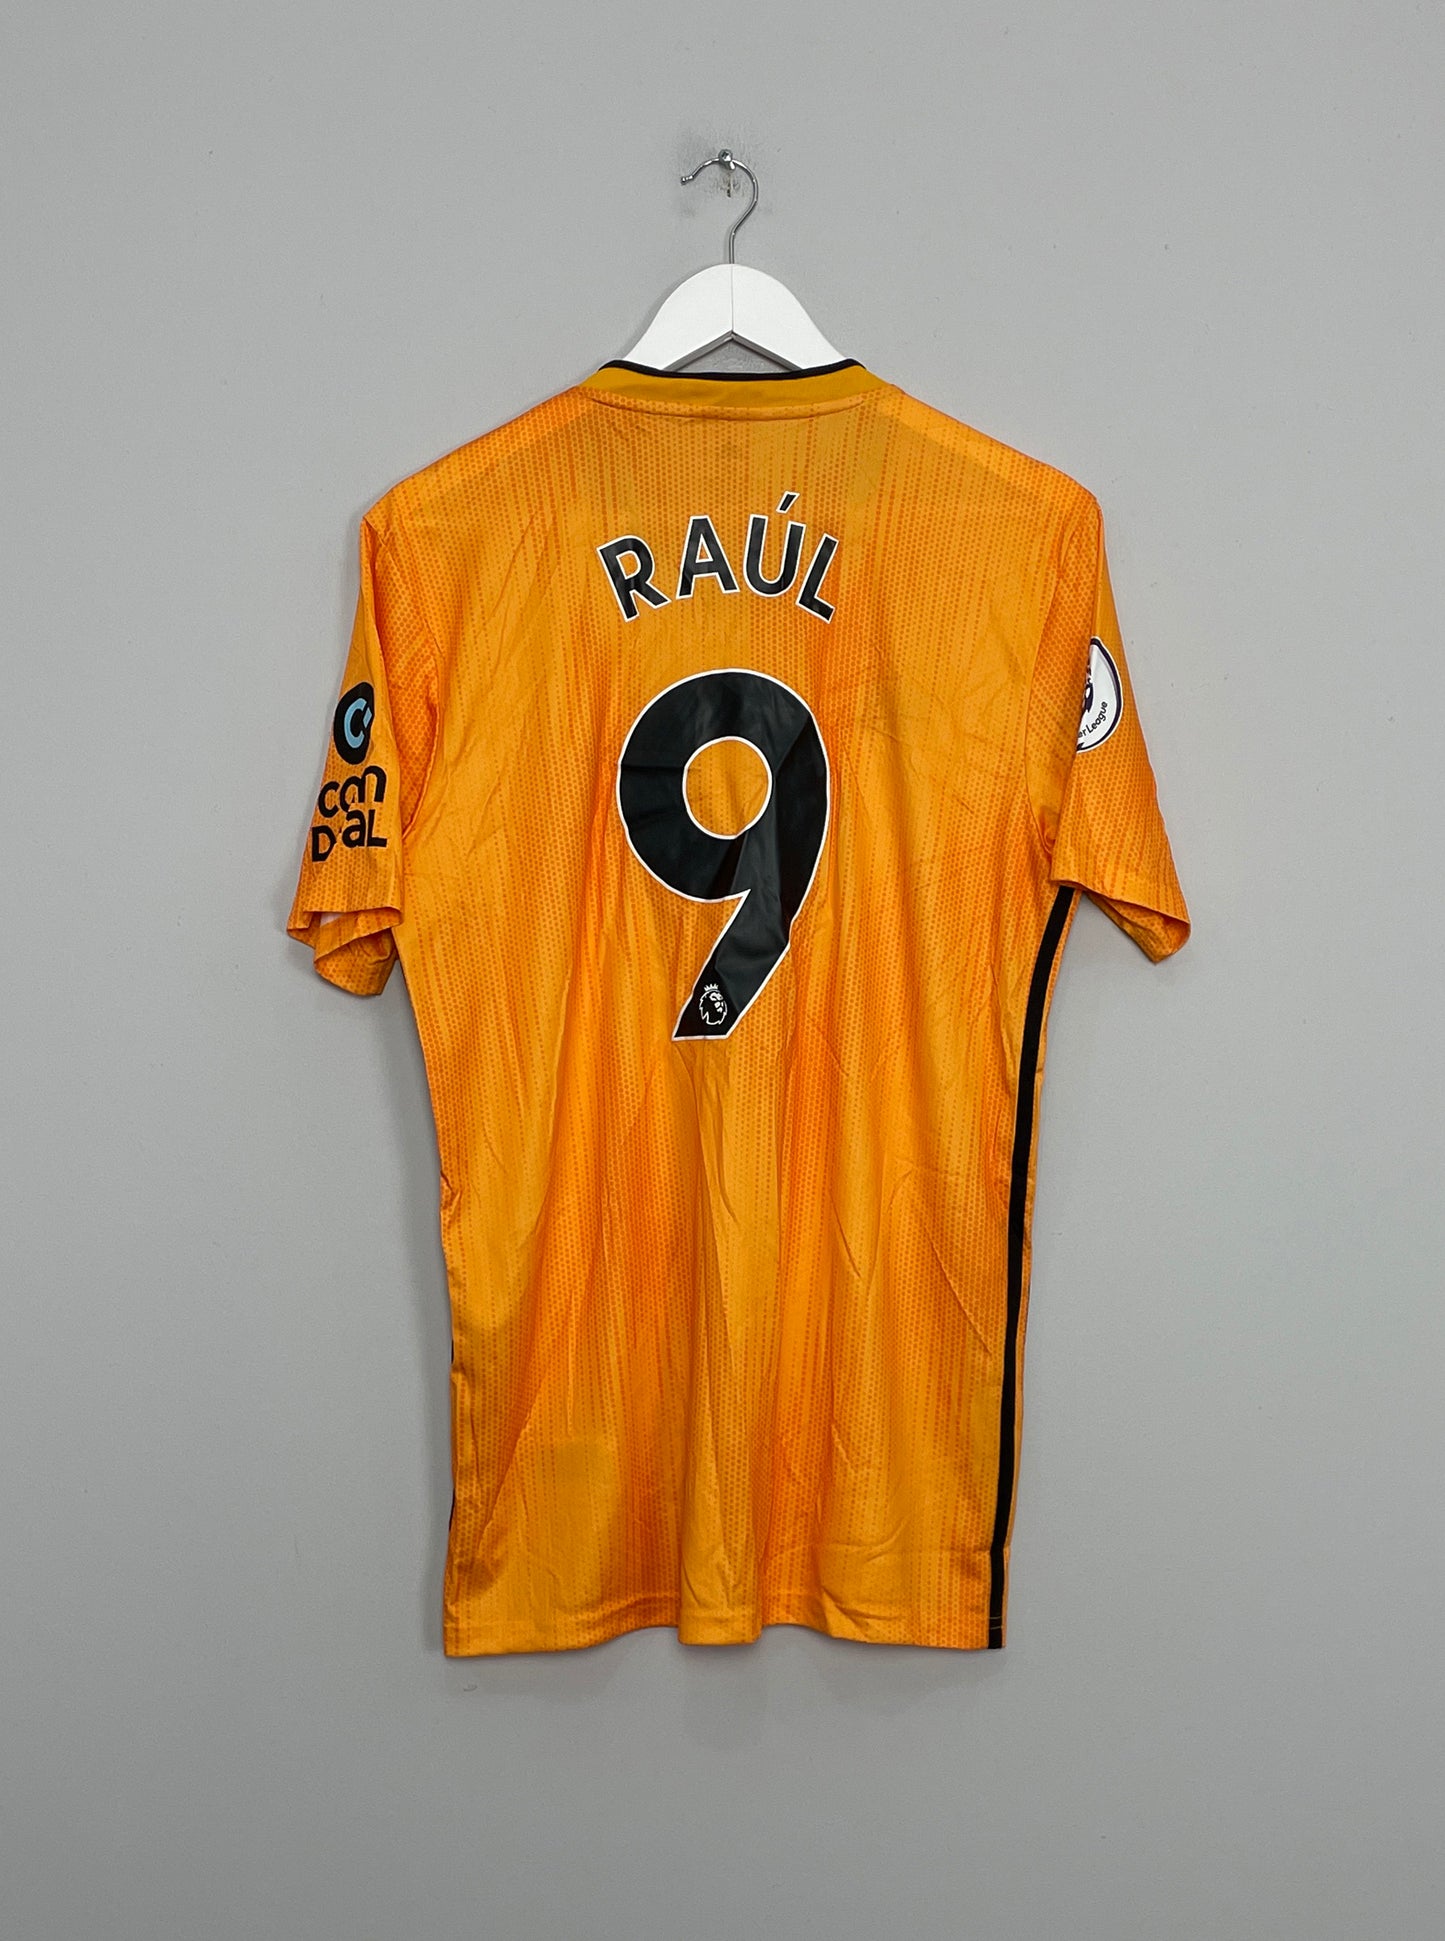 2019/20 WOLVES RAUL #9 *MATCH ISSUE* HOME SHIRT (M) ADIDAS